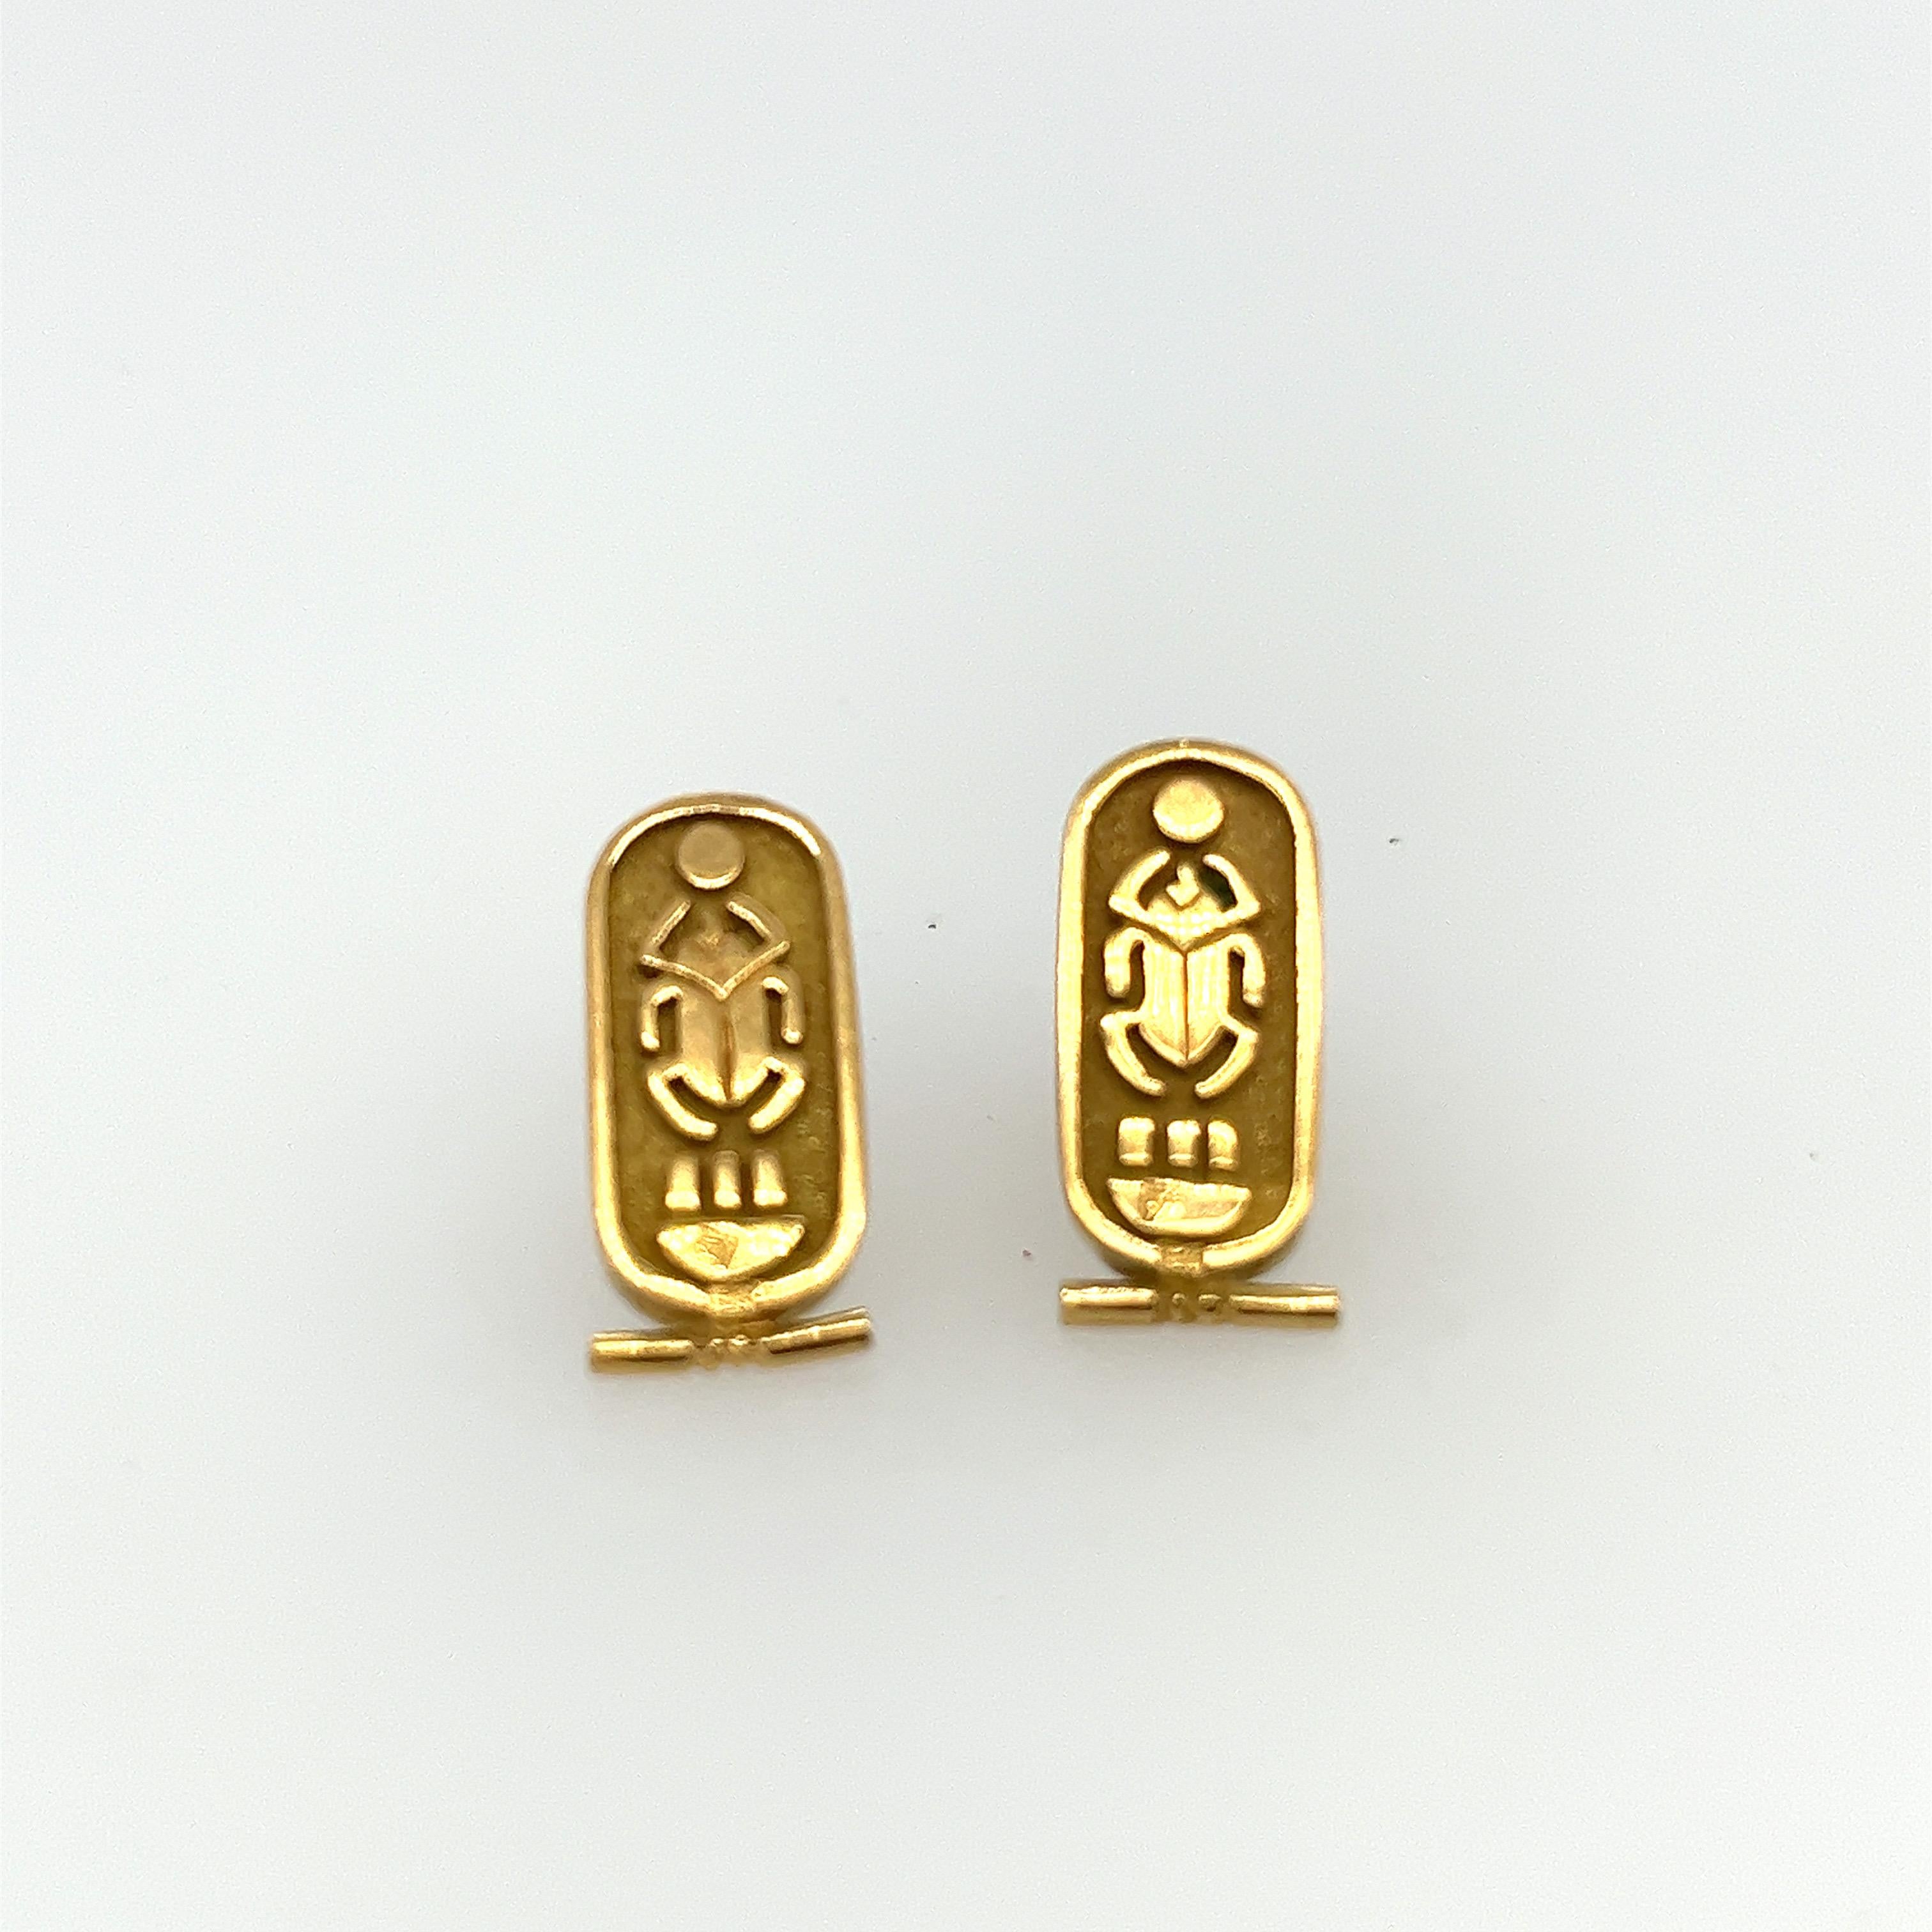 From the Egyptian jewellery revival comes these 14k yellow gold earrings. Engraved with a scarab beetle which was sacred to the Egyptian people these earrings will add a touch of history and class to your collection. Total weight is 4.7 grams.